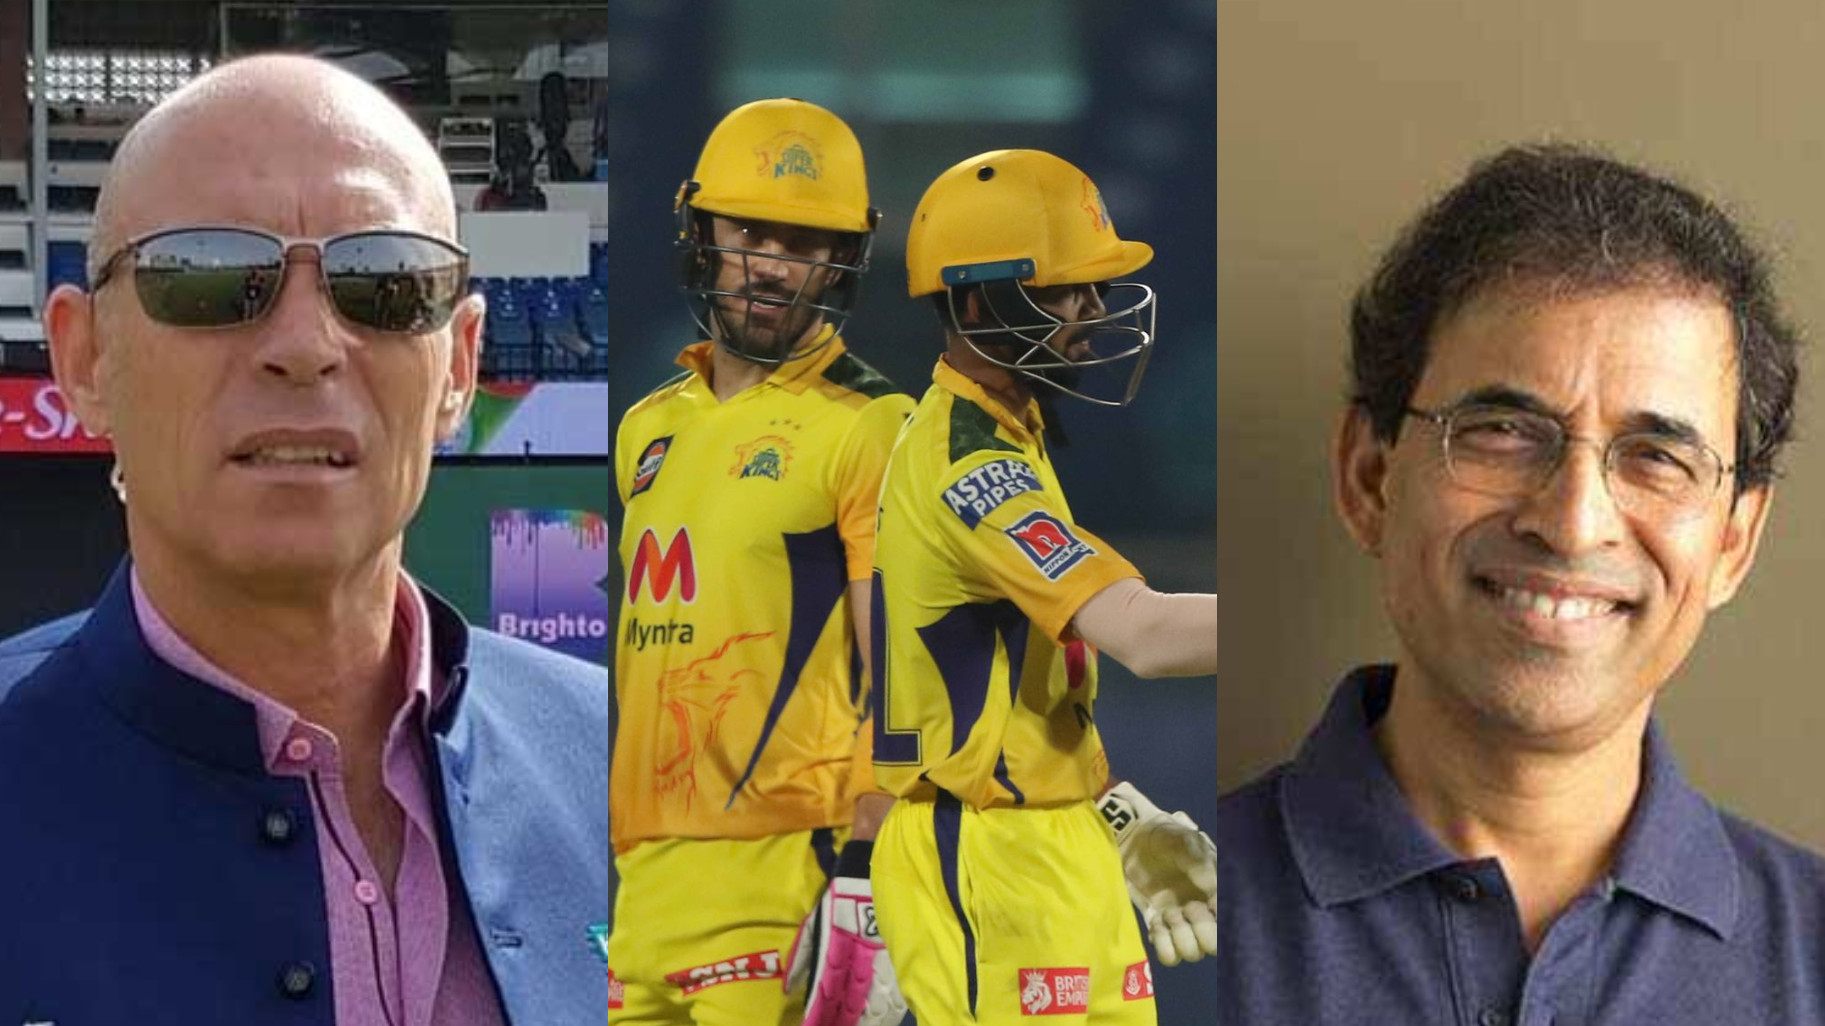 IPL 2021: Cricket fraternity reacts as CSK go to top spot on the points table after a 7-wicket win over SRH